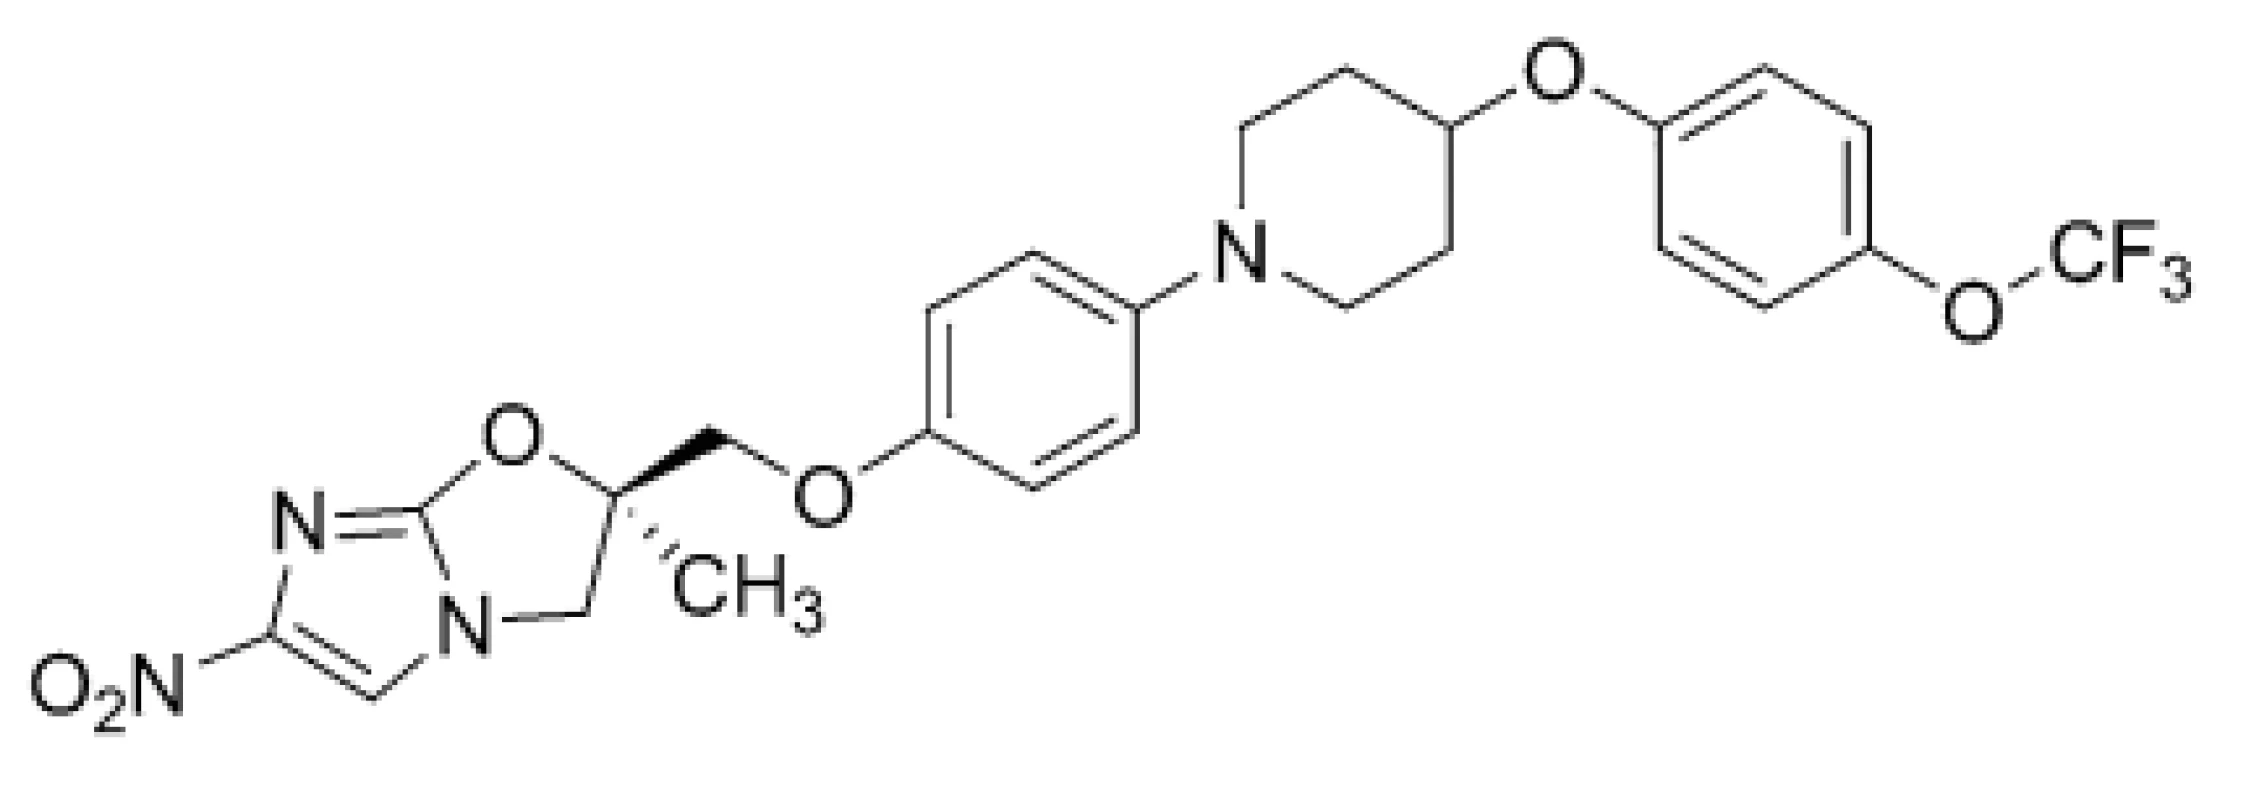 Chemical structure of delamanid (DLM; 2)